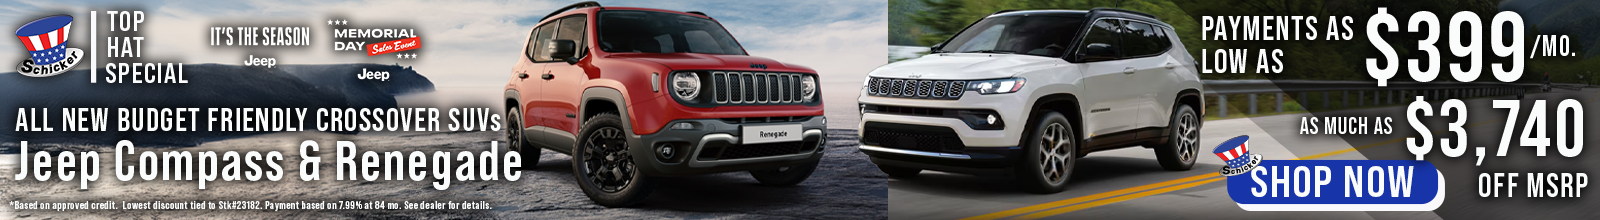 Jeep Compass and Renegade